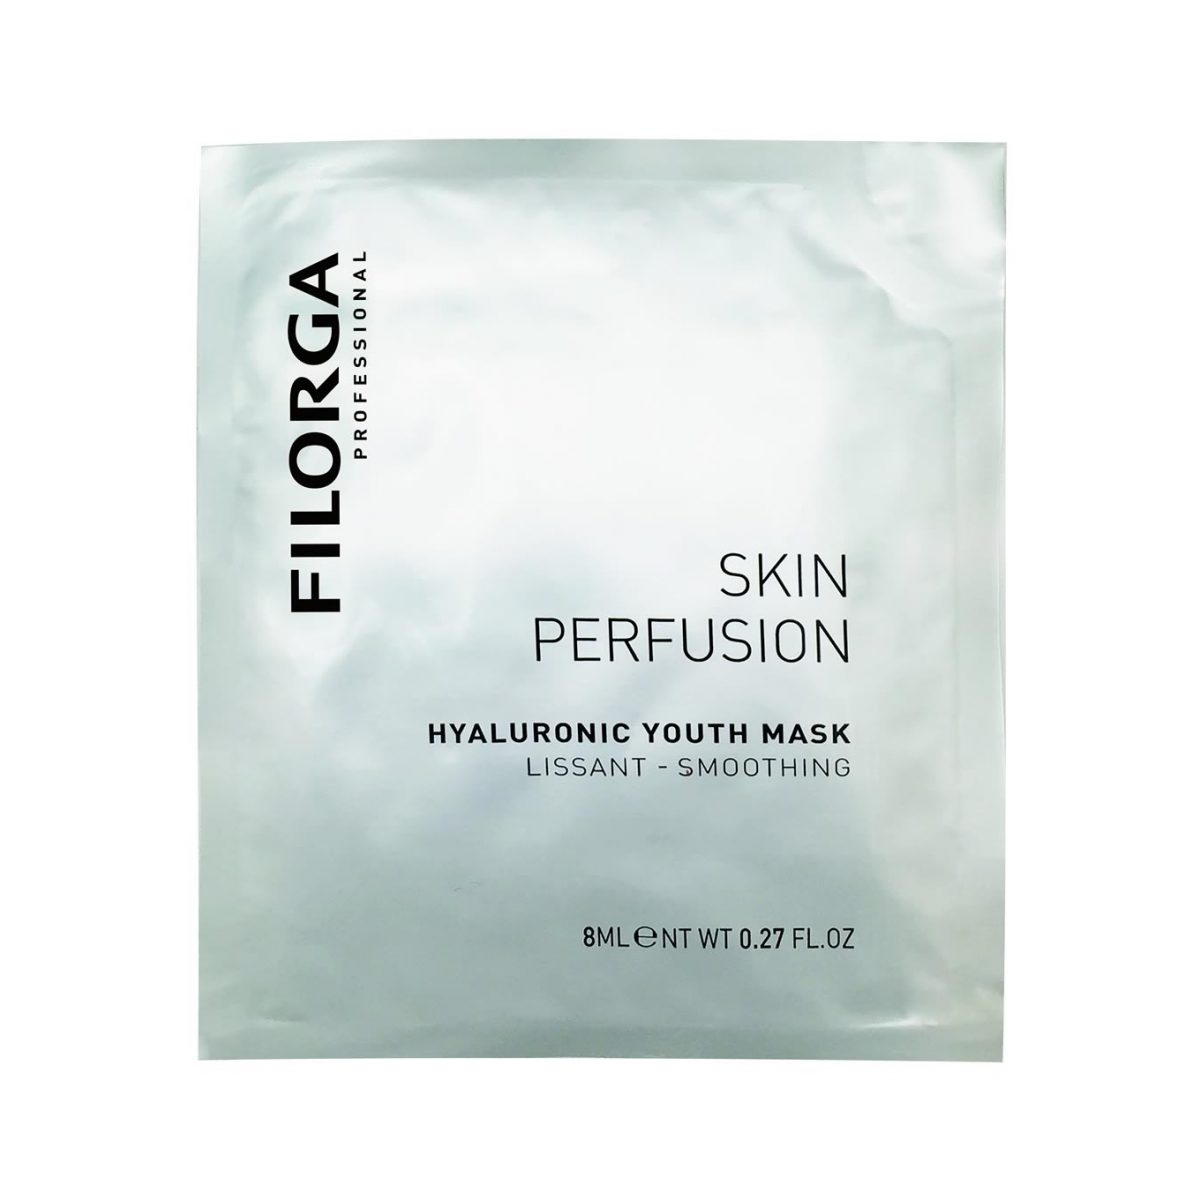 Hyaluronic Youth Mask